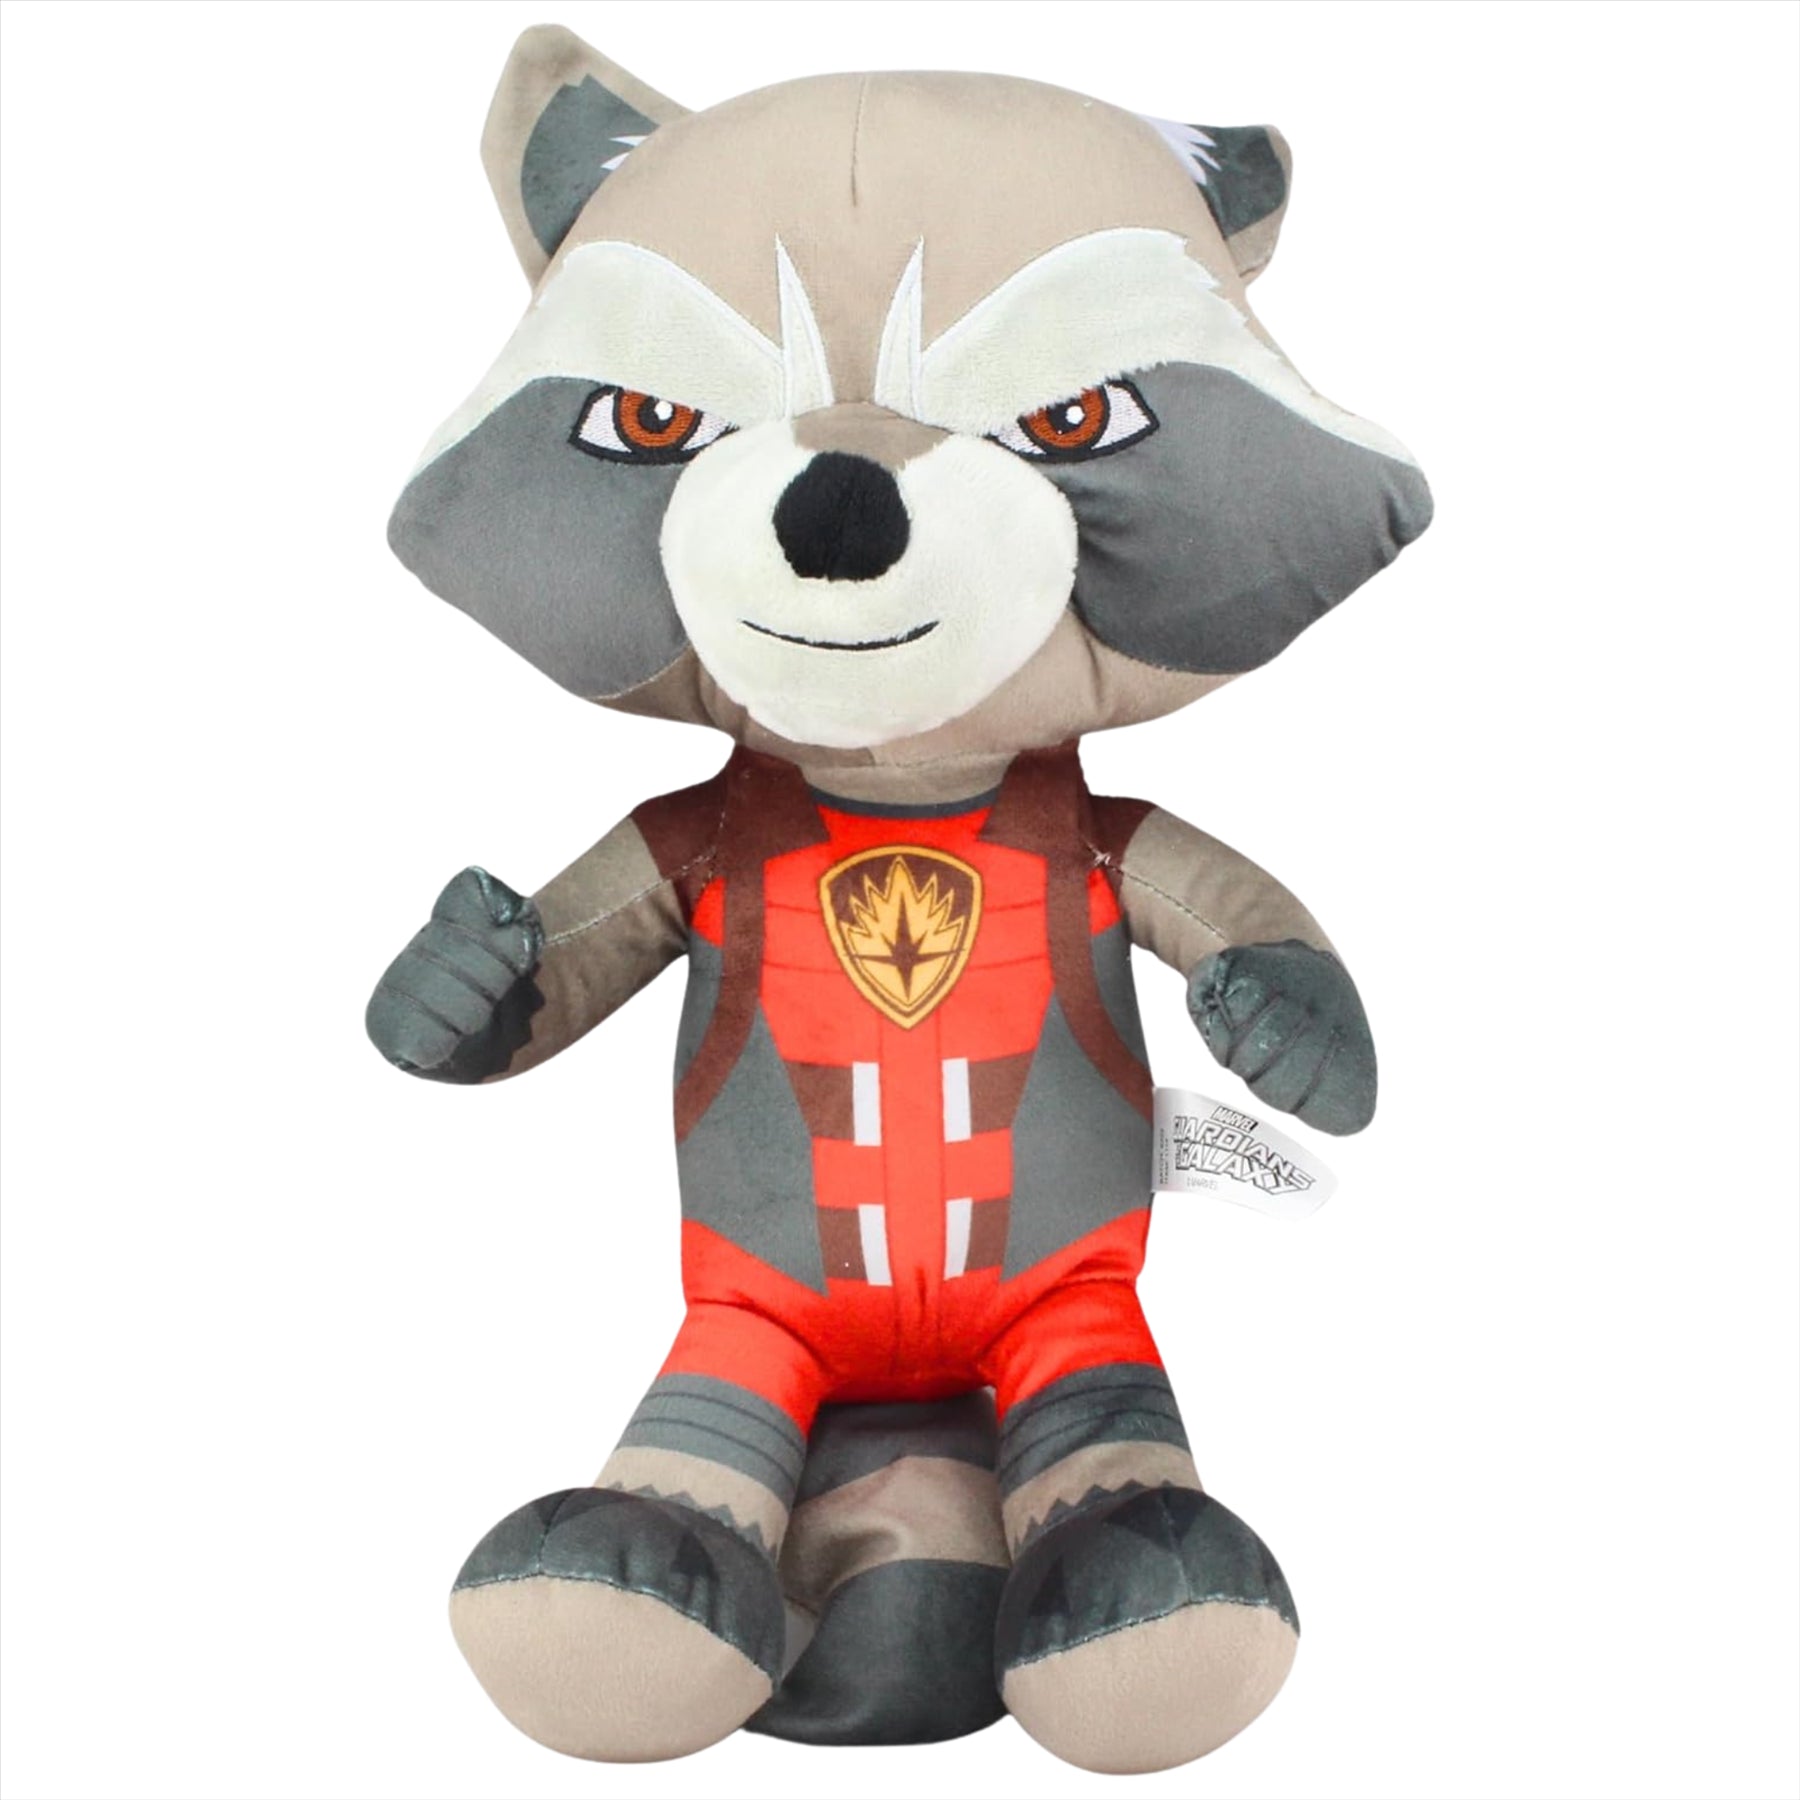 Guardians of the Galaxy Avengers Rocket Super Soft Embroidered 36cm Plush Toy